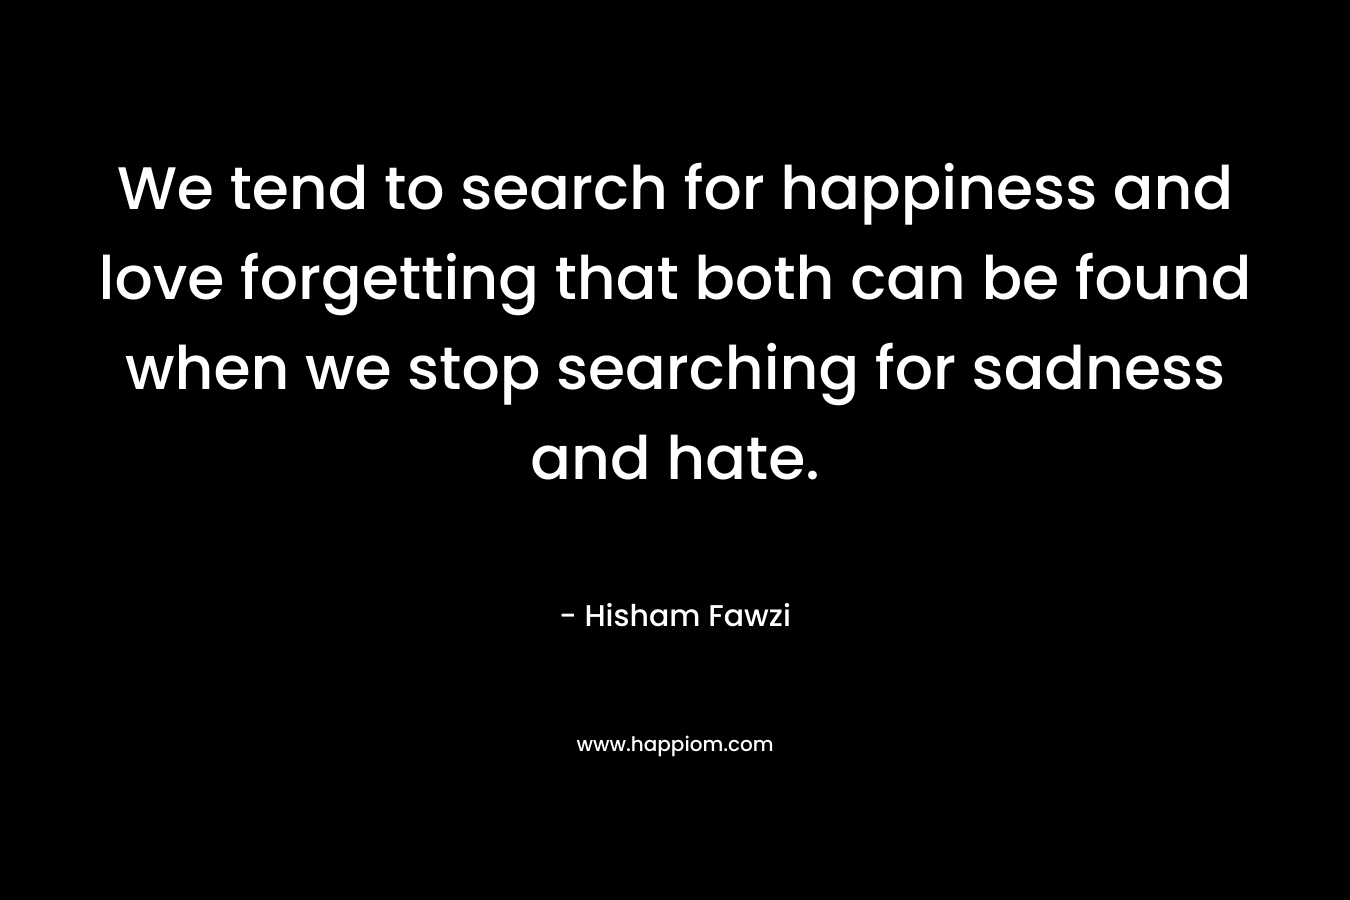 We tend to search for happiness and love forgetting that both can be found when we stop searching for sadness and hate. – Hisham Fawzi